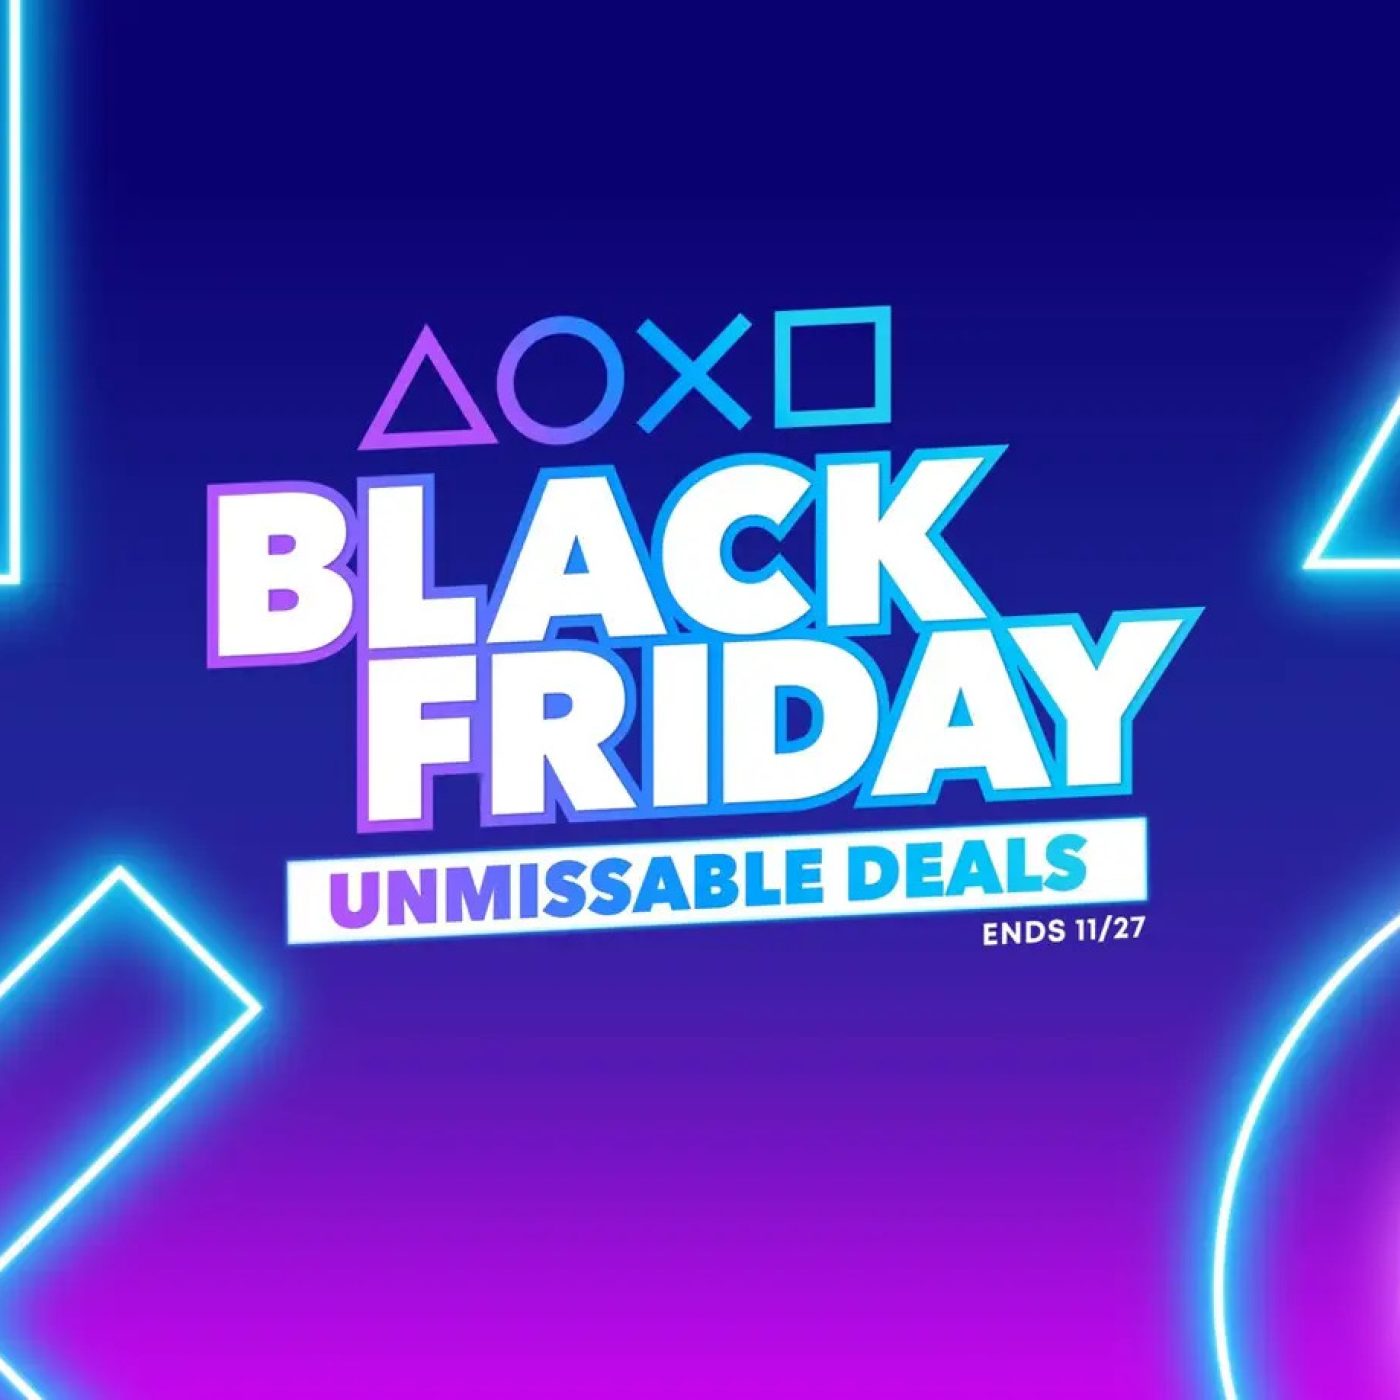 The PlayStation Store's Black Friday Sale Is On Now And Has Some